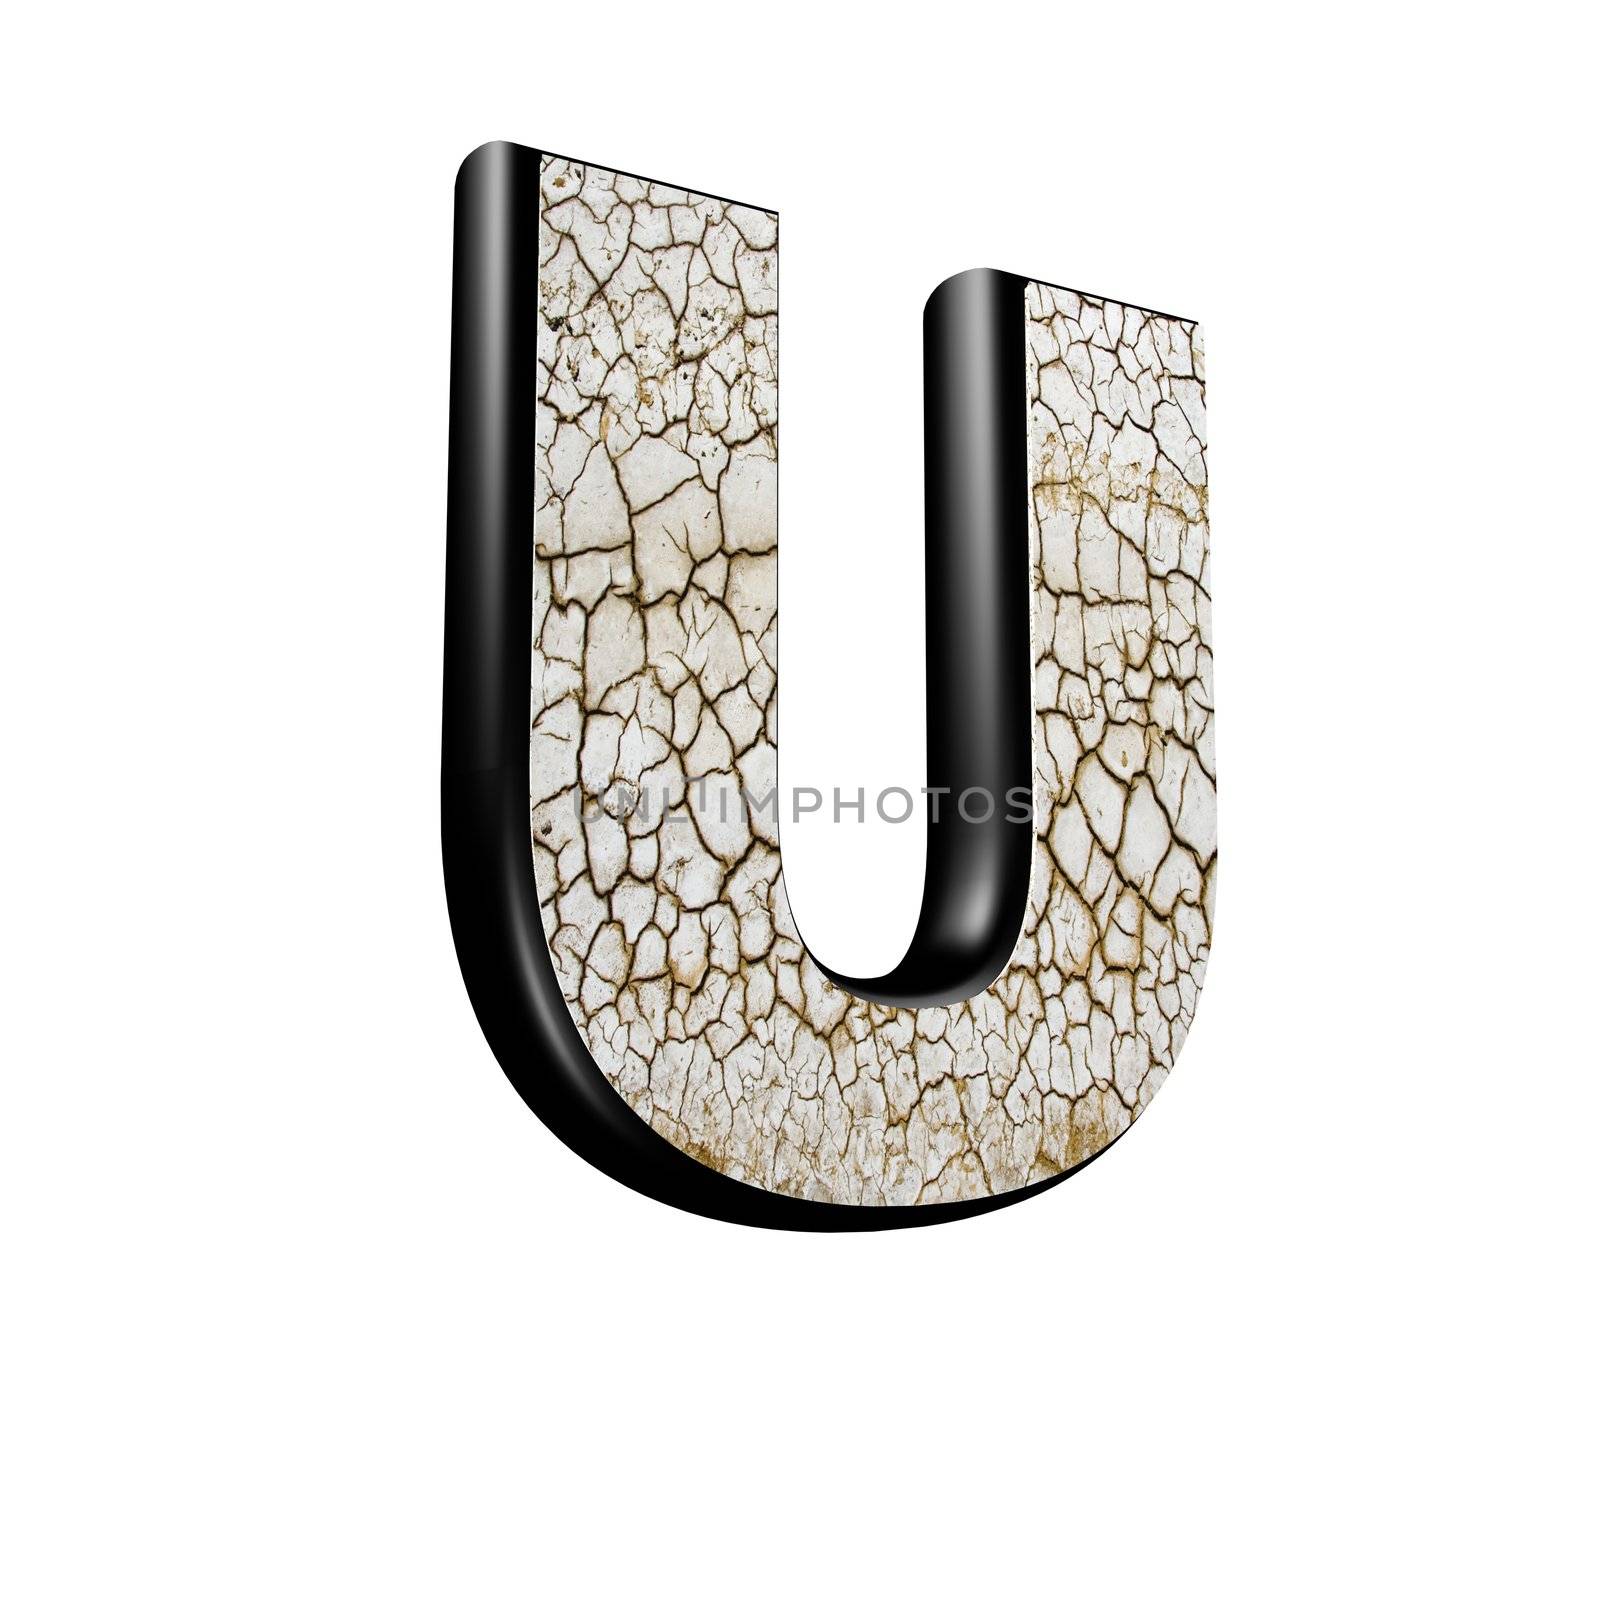 abstract 3d letter with dry ground texture - U by chrisroll